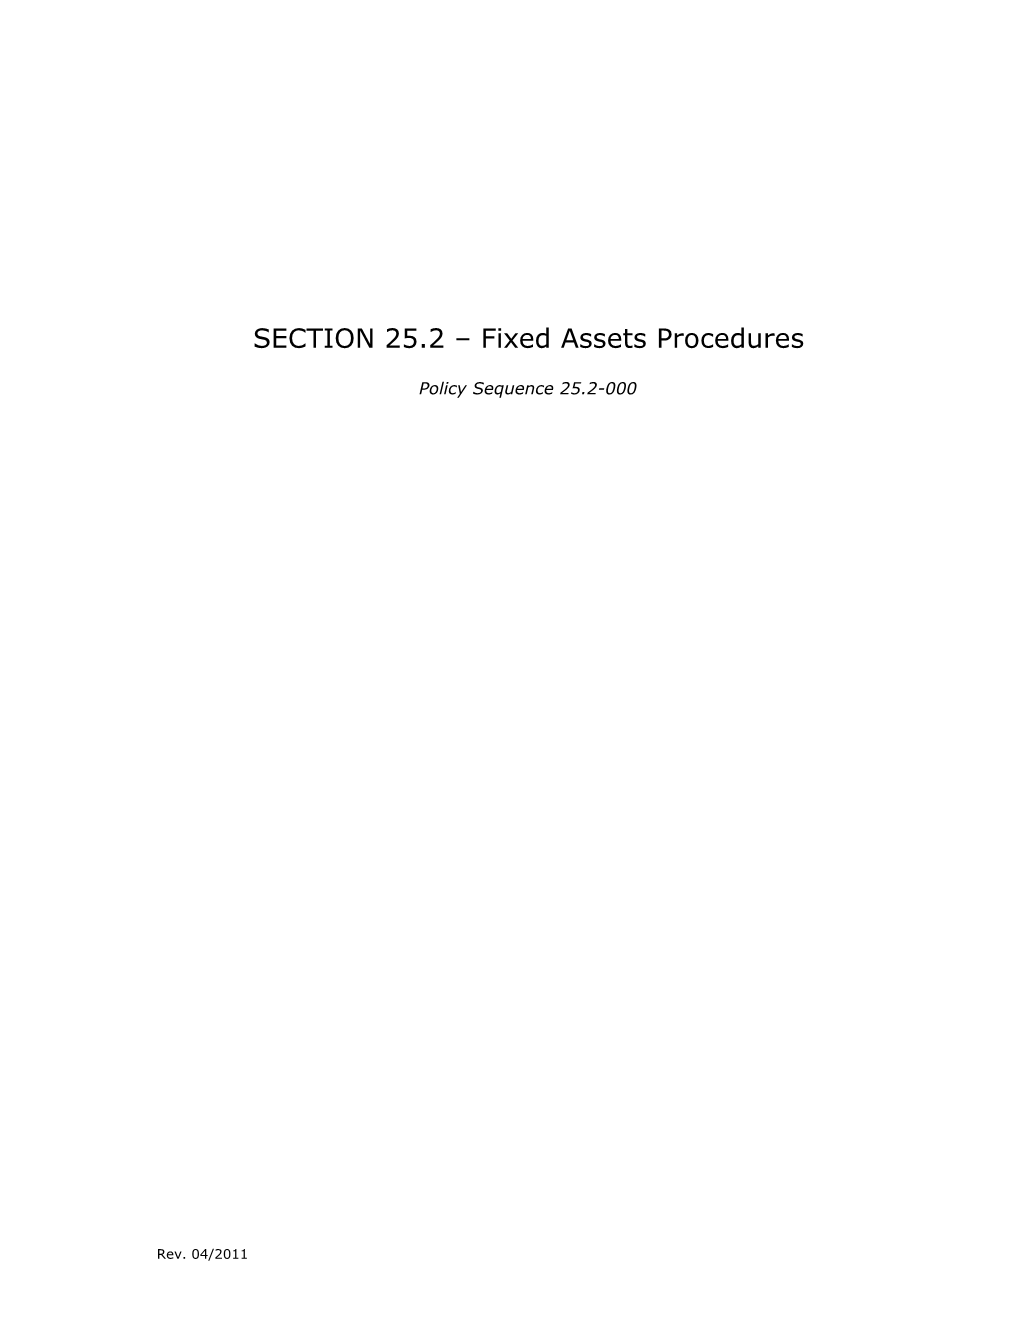 Section 25.2 - Fixed Assets Procedures